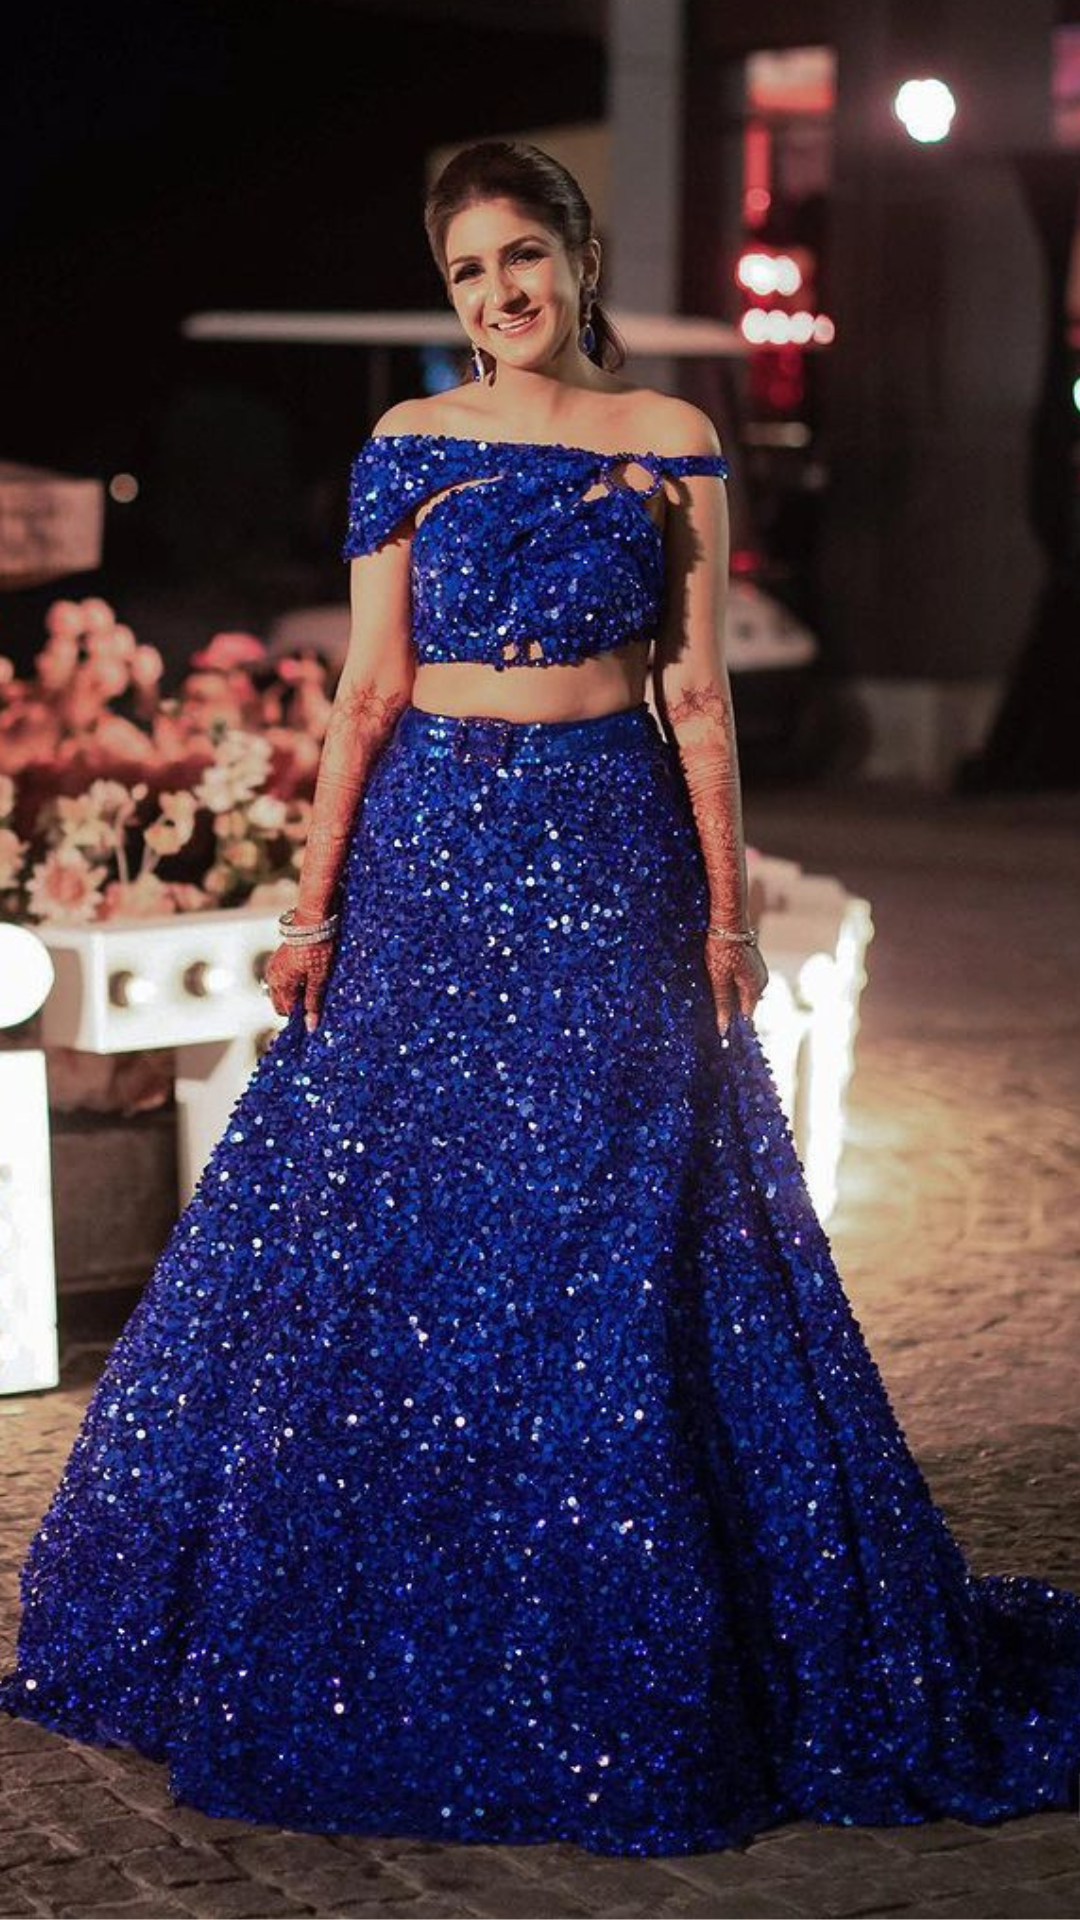 FABILICIOUS FASHION on Instagram: “The prettiest shade of blue in a lehenga  with a gorge…